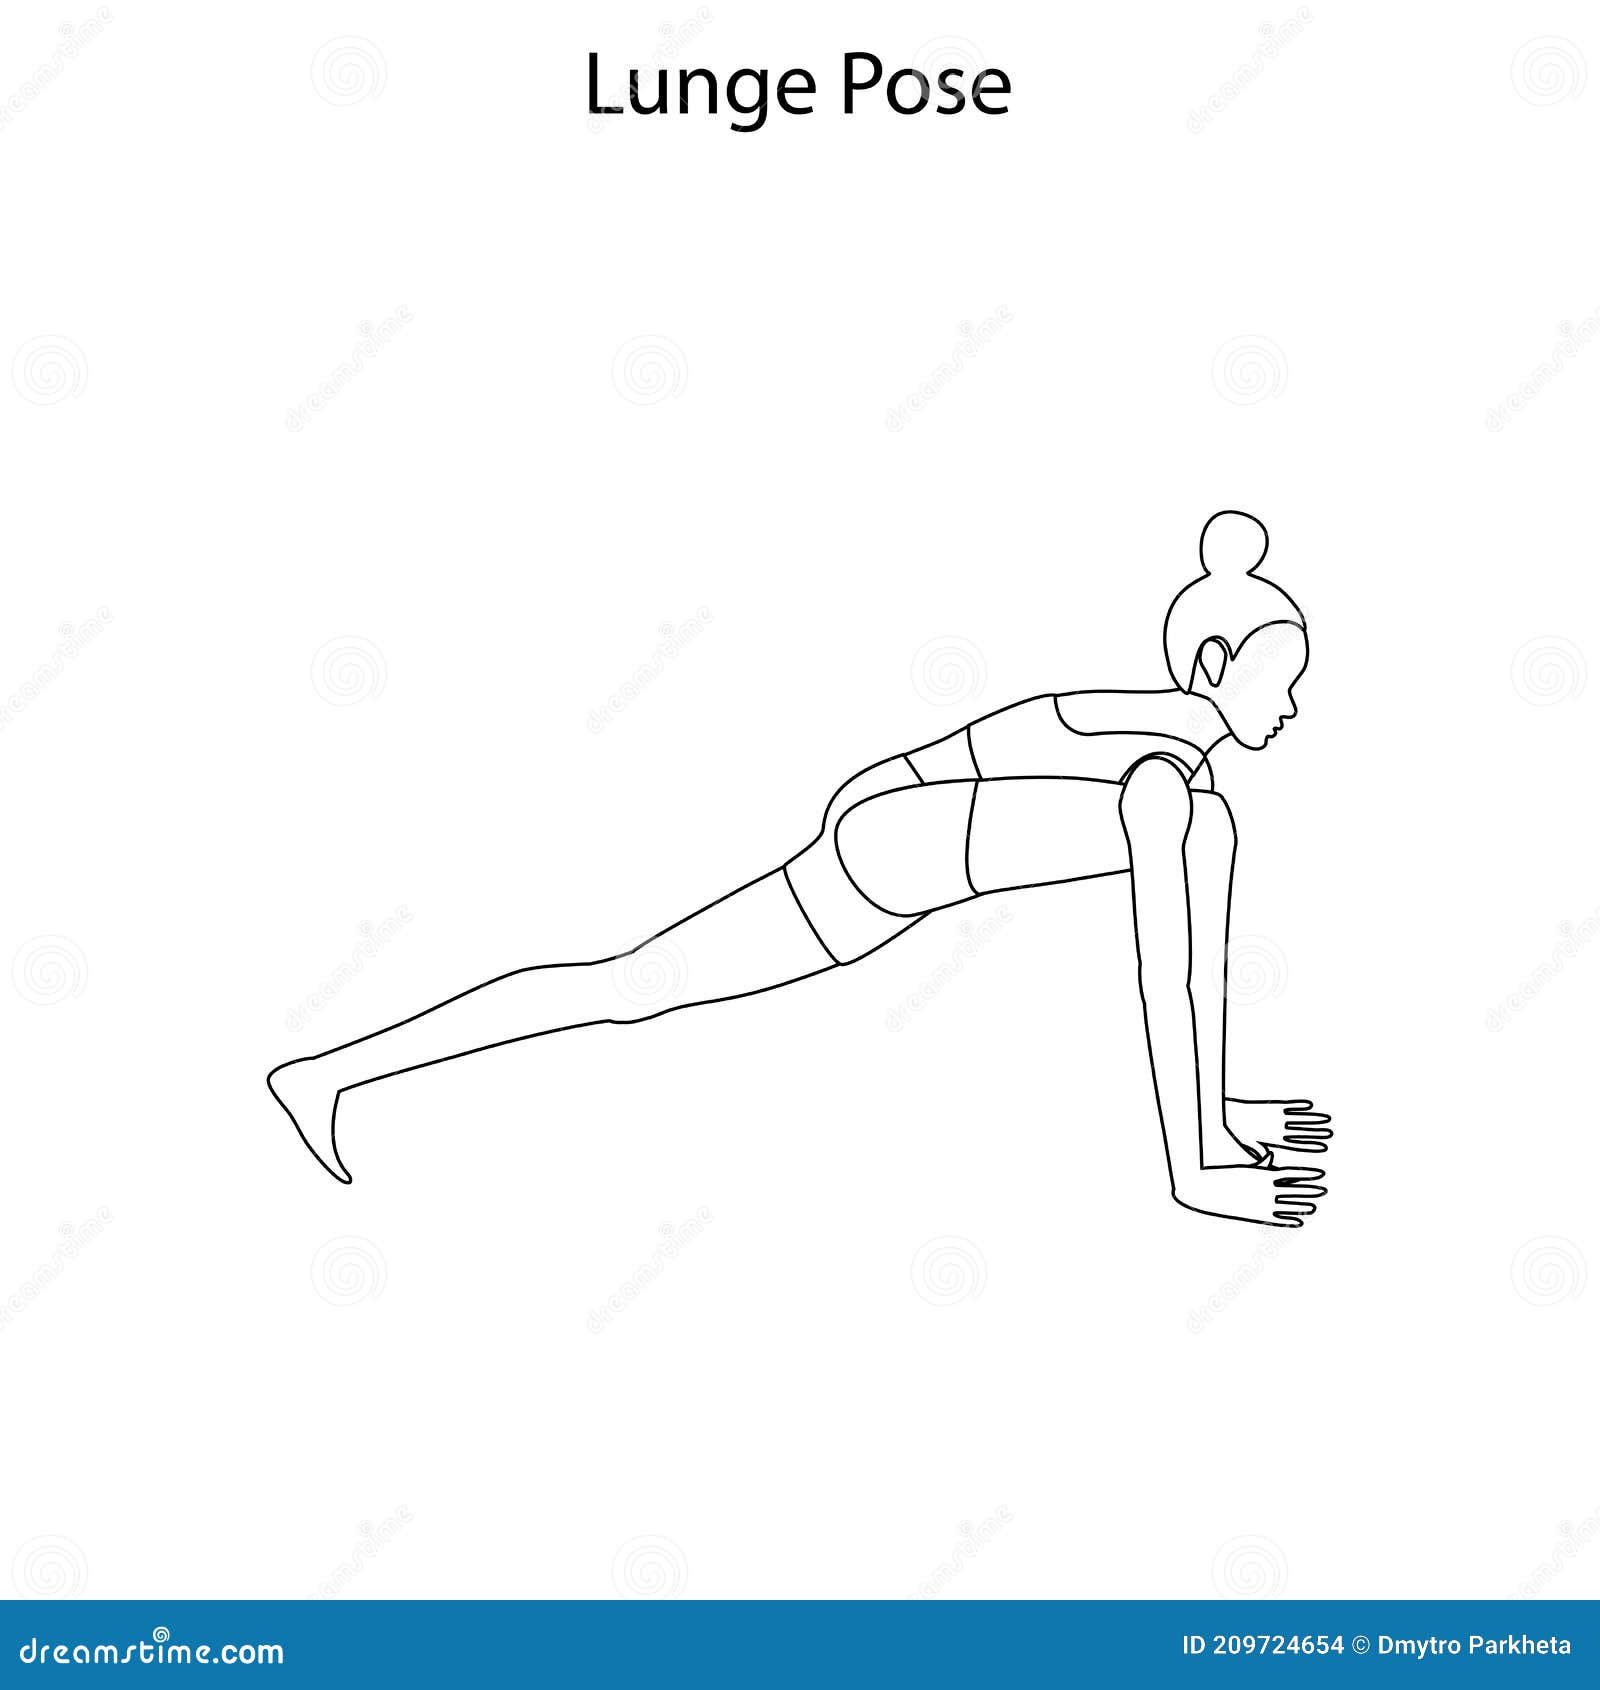 Lunge Pose Yoga Workout Outline. Healthy Lifestyle Vector Illustration ...